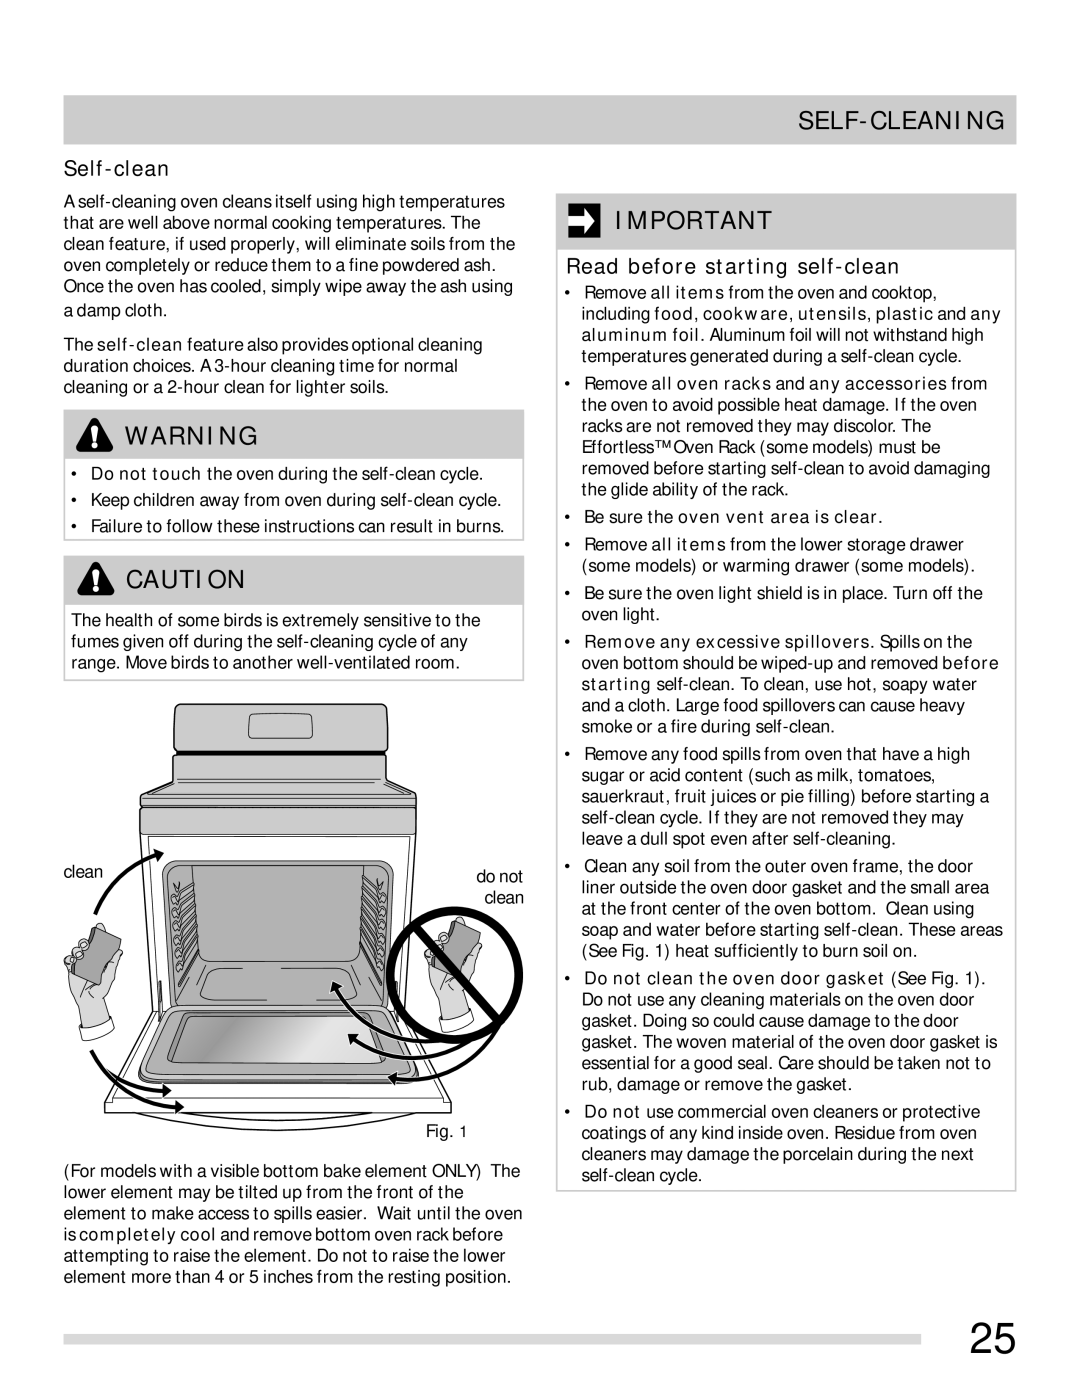 Frigidaire 316902315 important safety instructions Self-Cleaning, Self-clean, Read before starting self-clean 